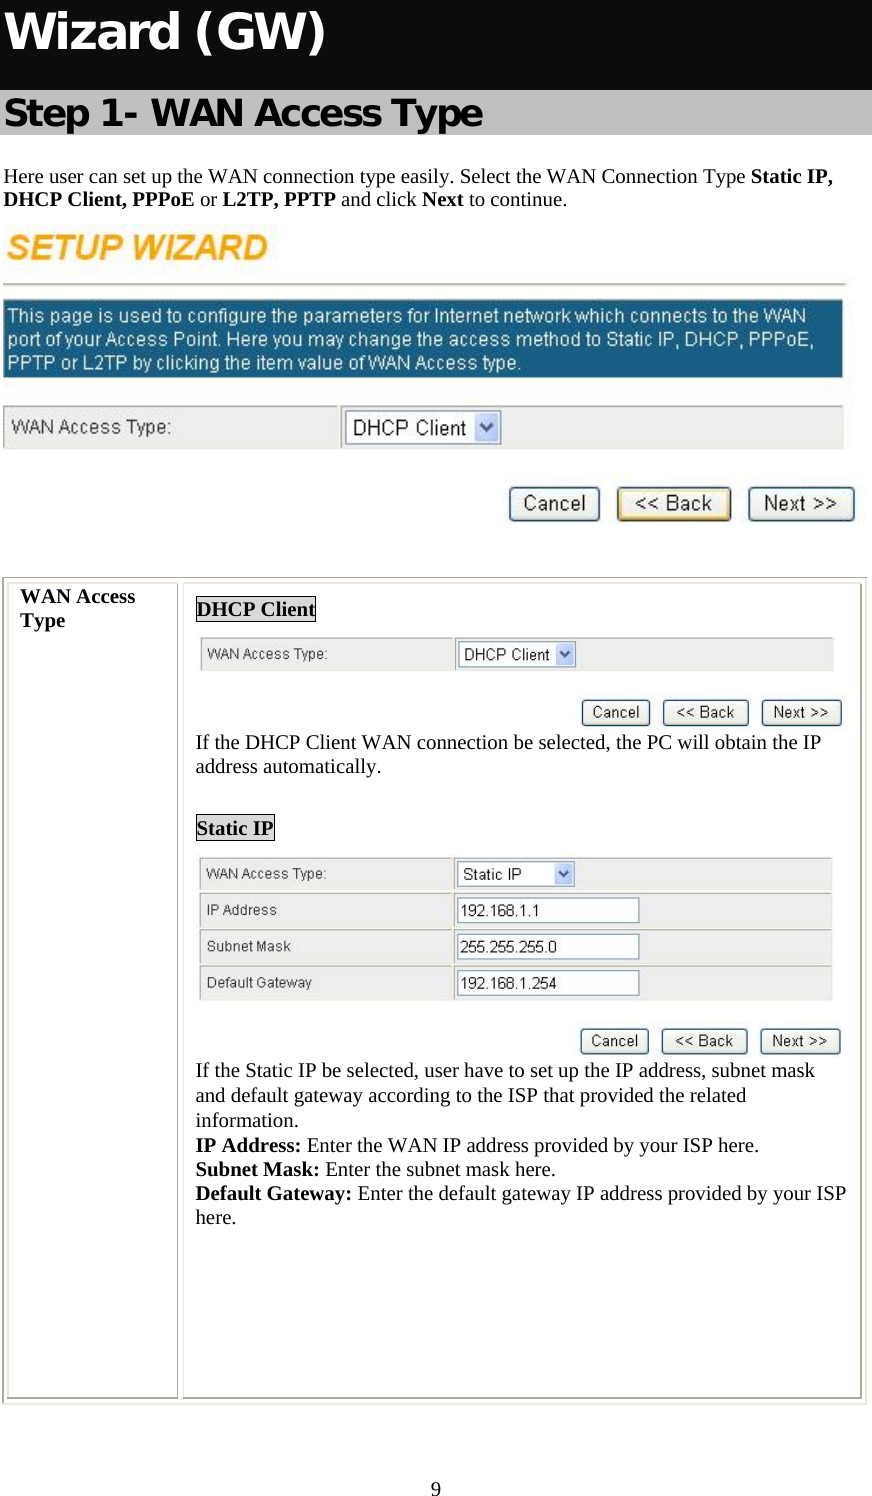   9Wizard (GW)  Step 1- WAN Access Type Here user can set up the WAN connection type easily. Select the WAN Connection Type Static IP, DHCP Client, PPPoE or L2TP, PPTP and click Next to continue.   WAN Access Type  DHCP Client If the DHCP Client WAN connection be selected, the PC will obtain the IP address automatically.  Static IP  If the Static IP be selected, user have to set up the IP address, subnet mask and default gateway according to the ISP that provided the related information. IP Address: Enter the WAN IP address provided by your ISP here. Subnet Mask: Enter the subnet mask here. Default Gateway: Enter the default gateway IP address provided by your ISP here.        